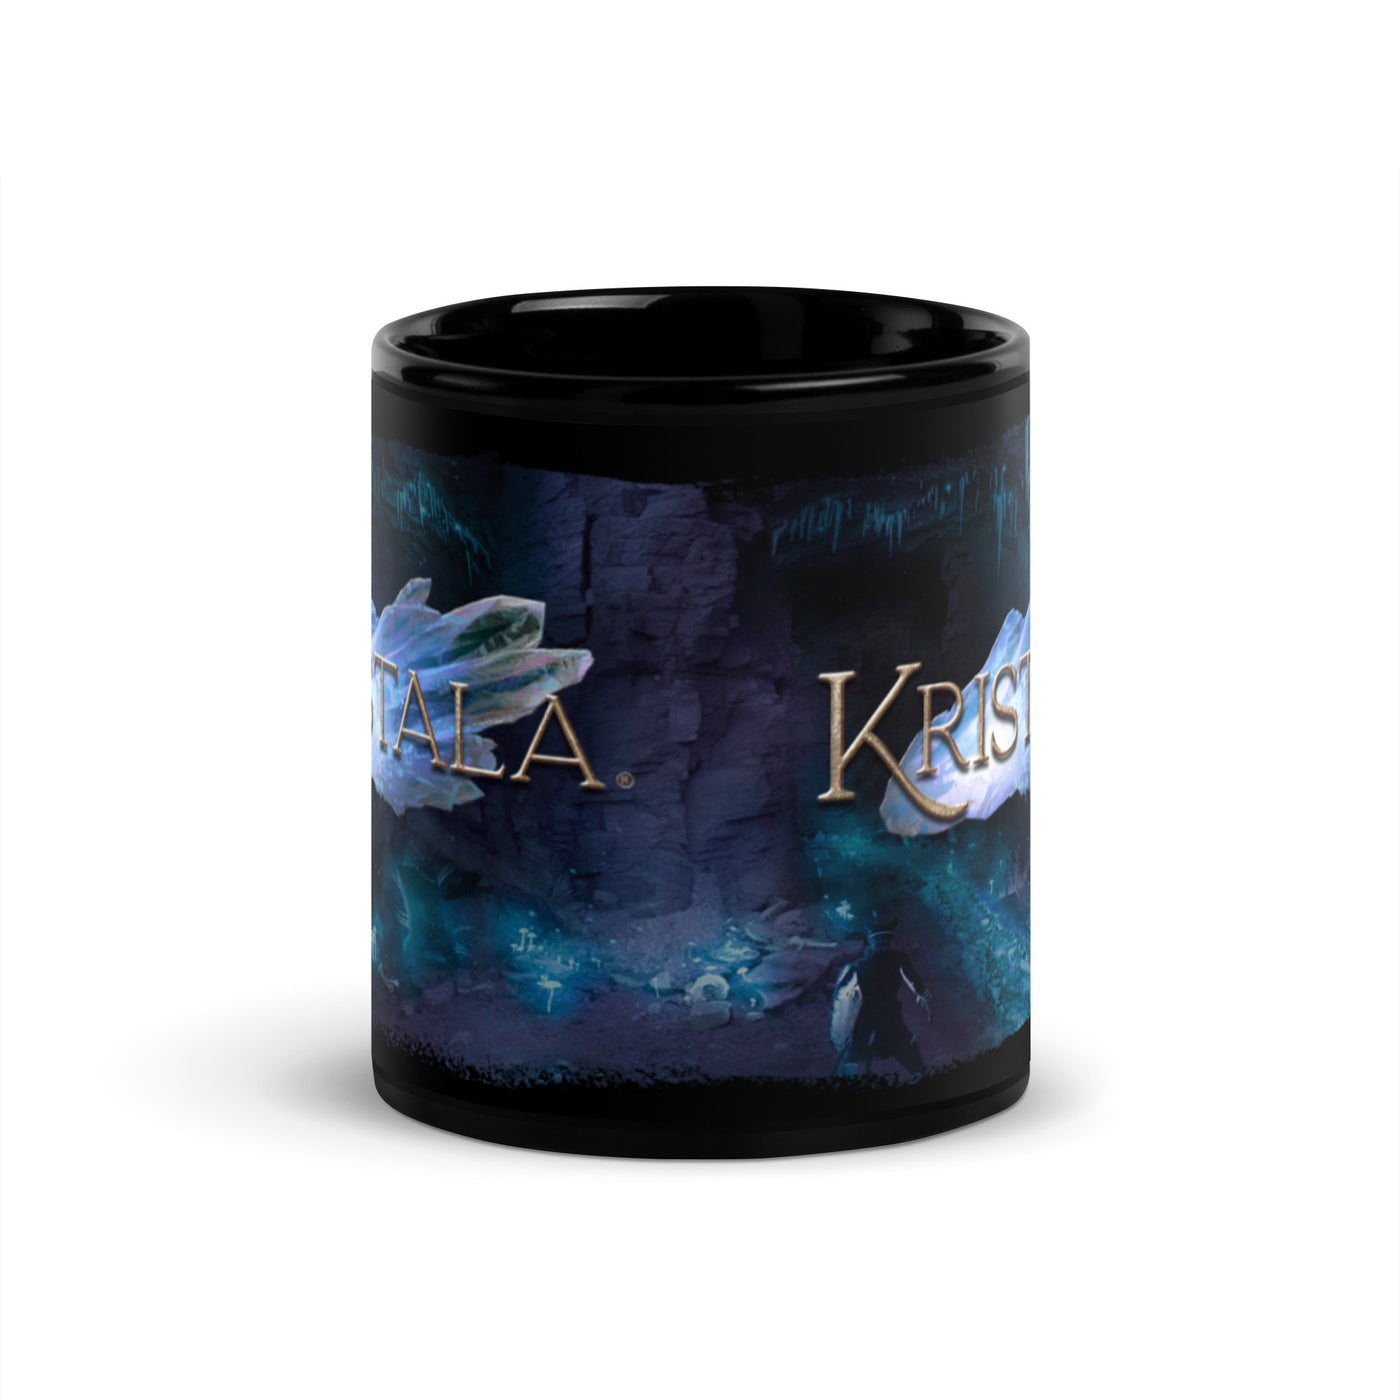 head-on front view of black ceramic coffe mug tea or tea mug with glossy finish and kristala game dark fantasy action rpg logo atop a cave crystal game illustration white background